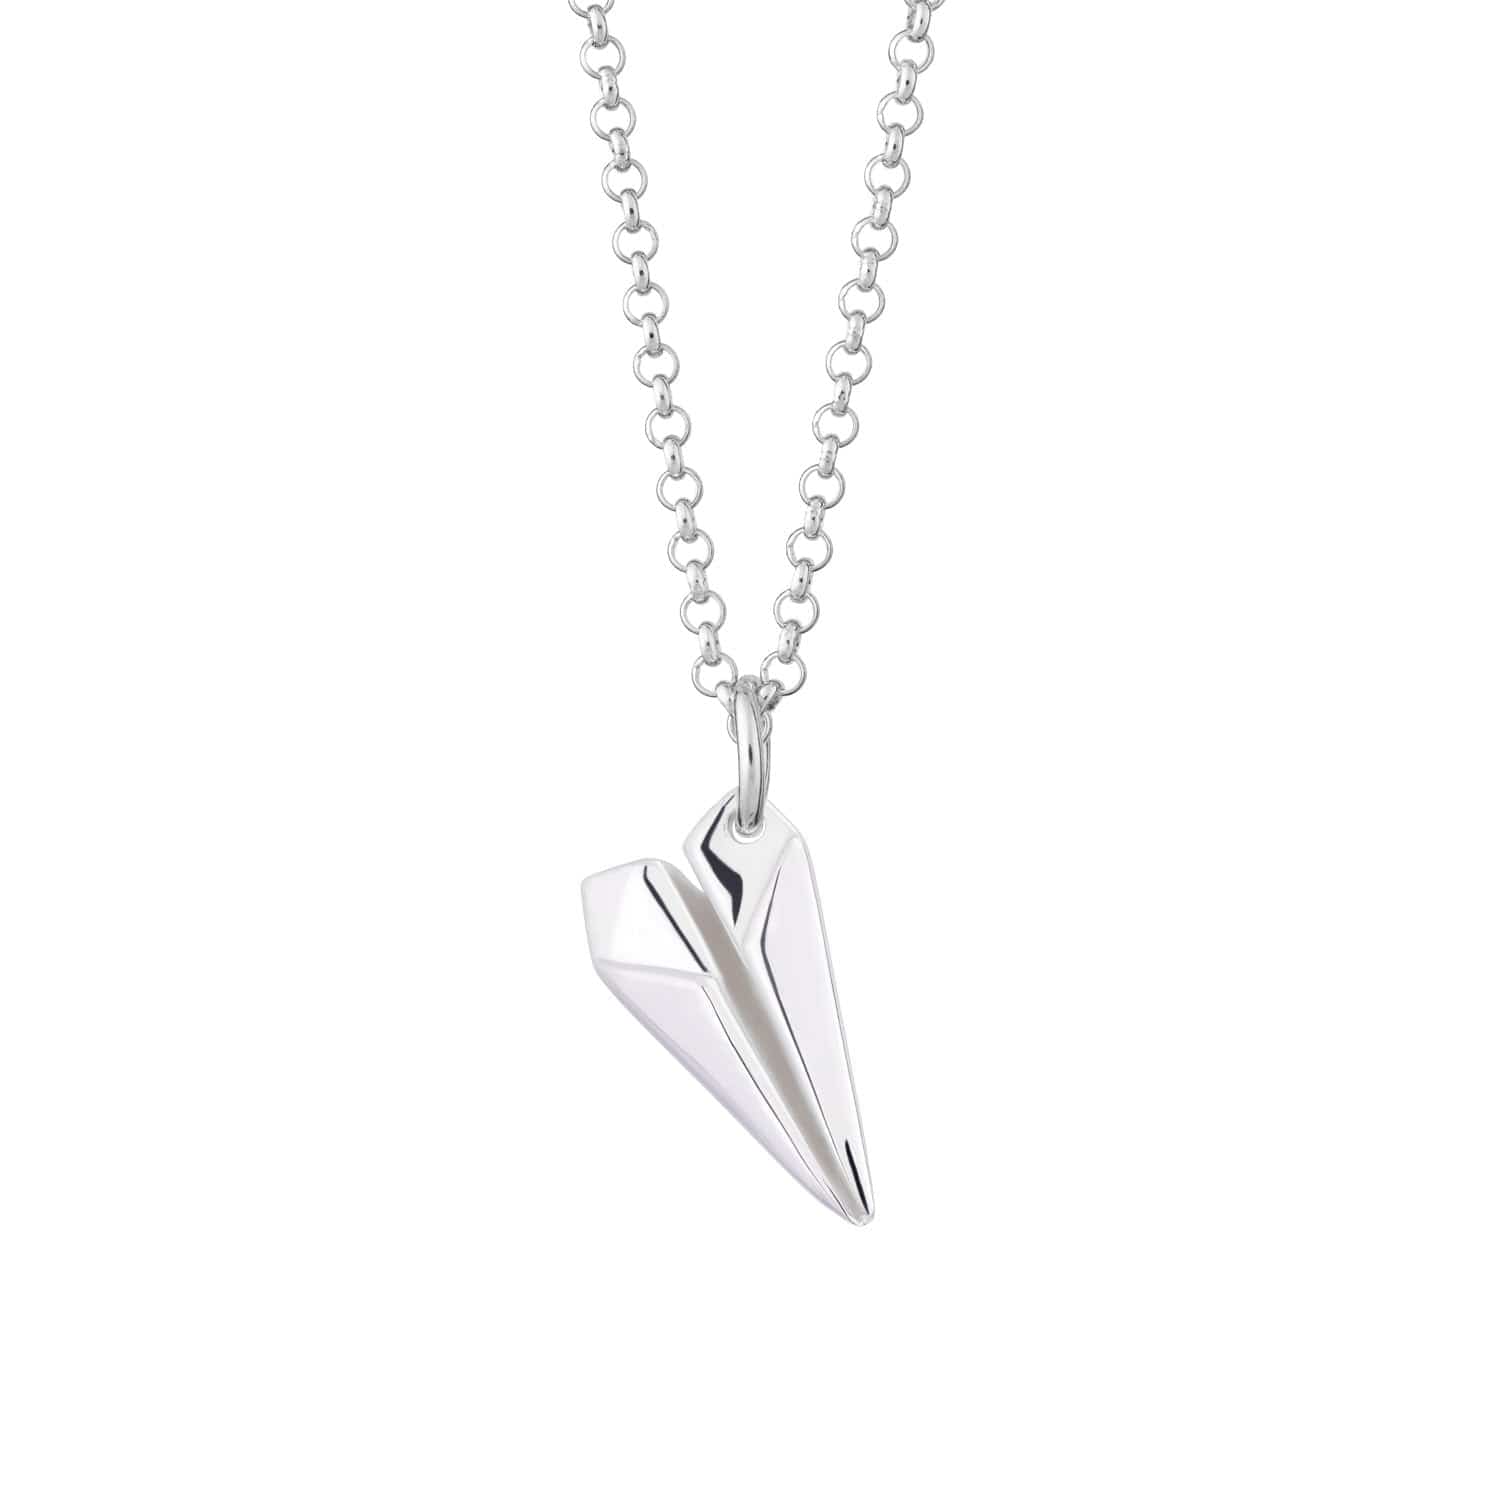 Paper Plane Necklace Origami Necklace Paper Plane Jewellery 